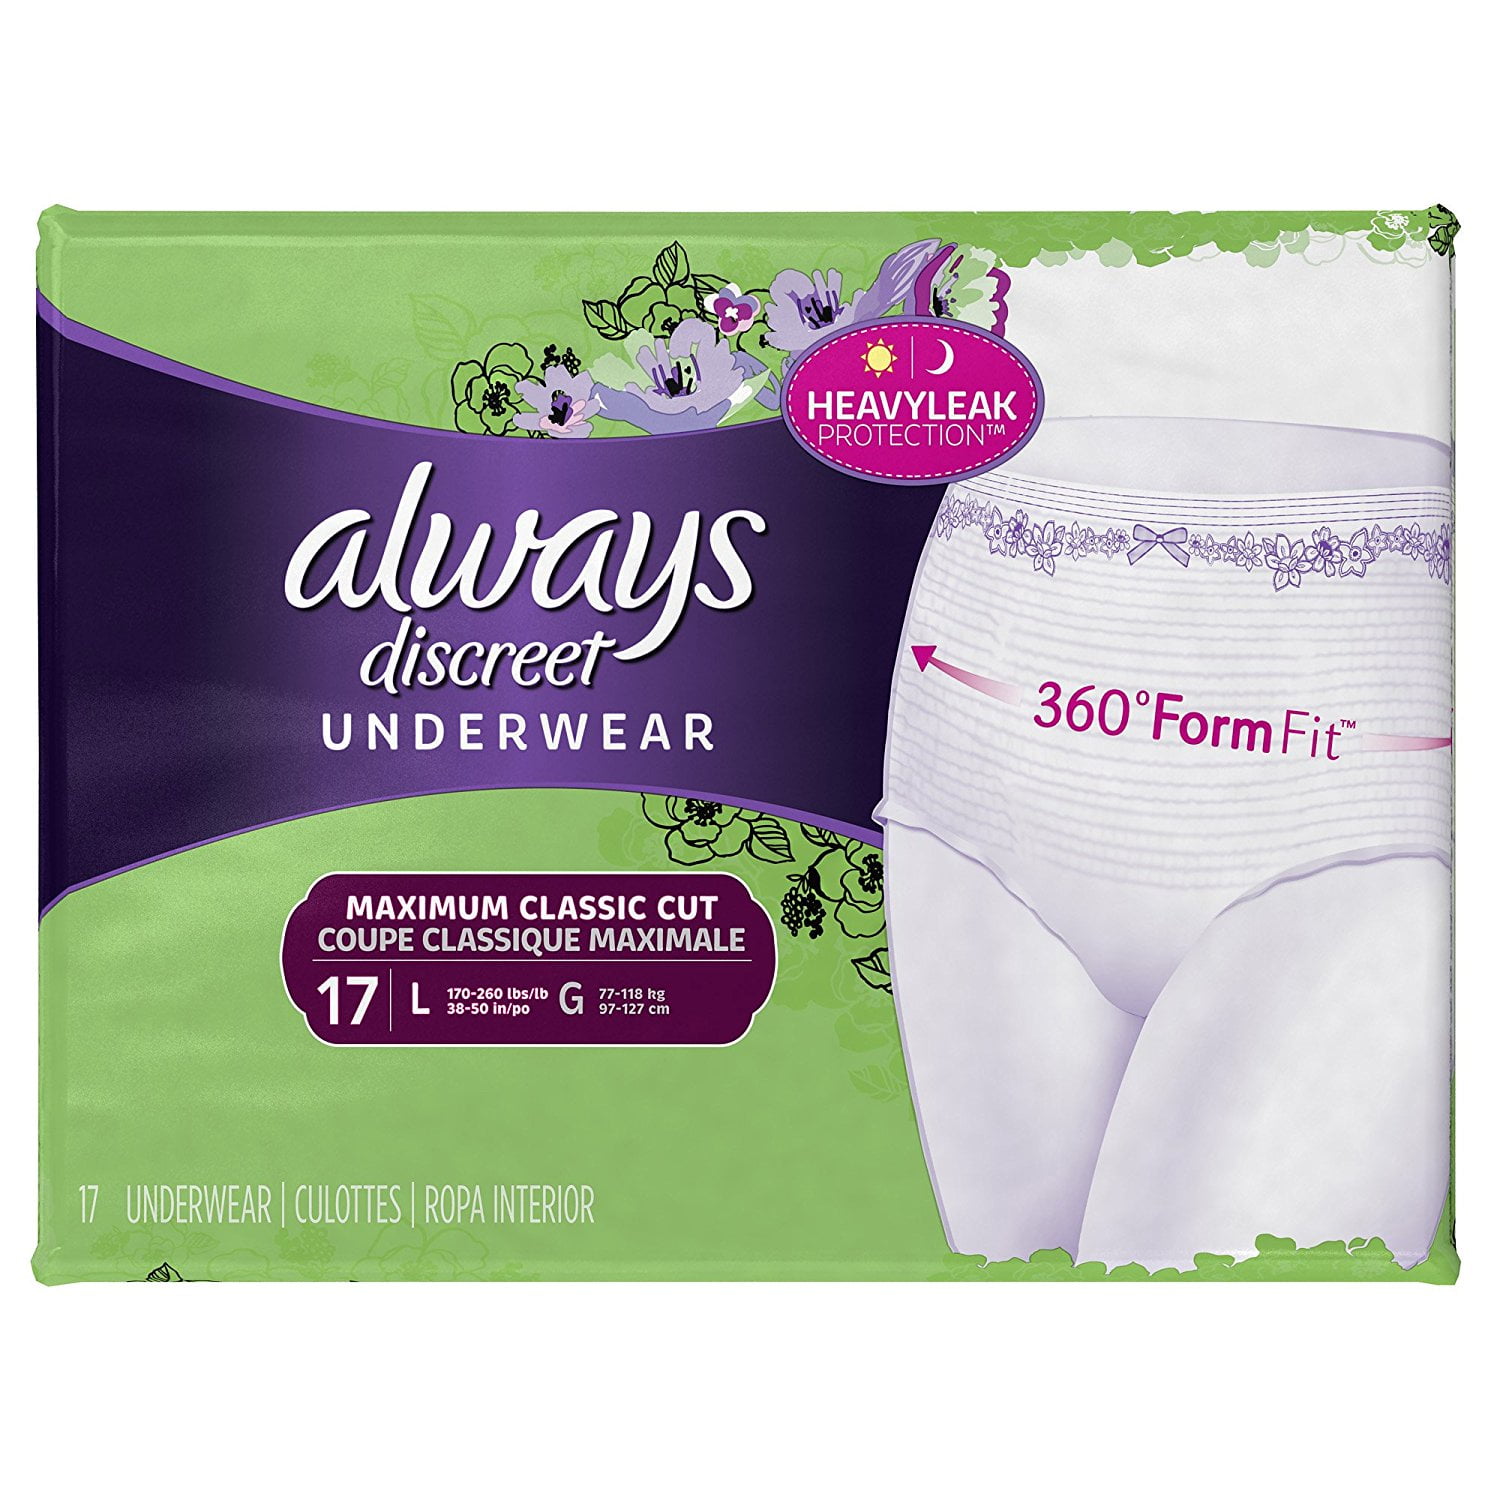 DAFI Menstrual Period & Postpartum Incontinence Underwear for Women, 48  Count/Large Overnight Disposable Briefs, Teen Leak-Proof Panty Style Pad 